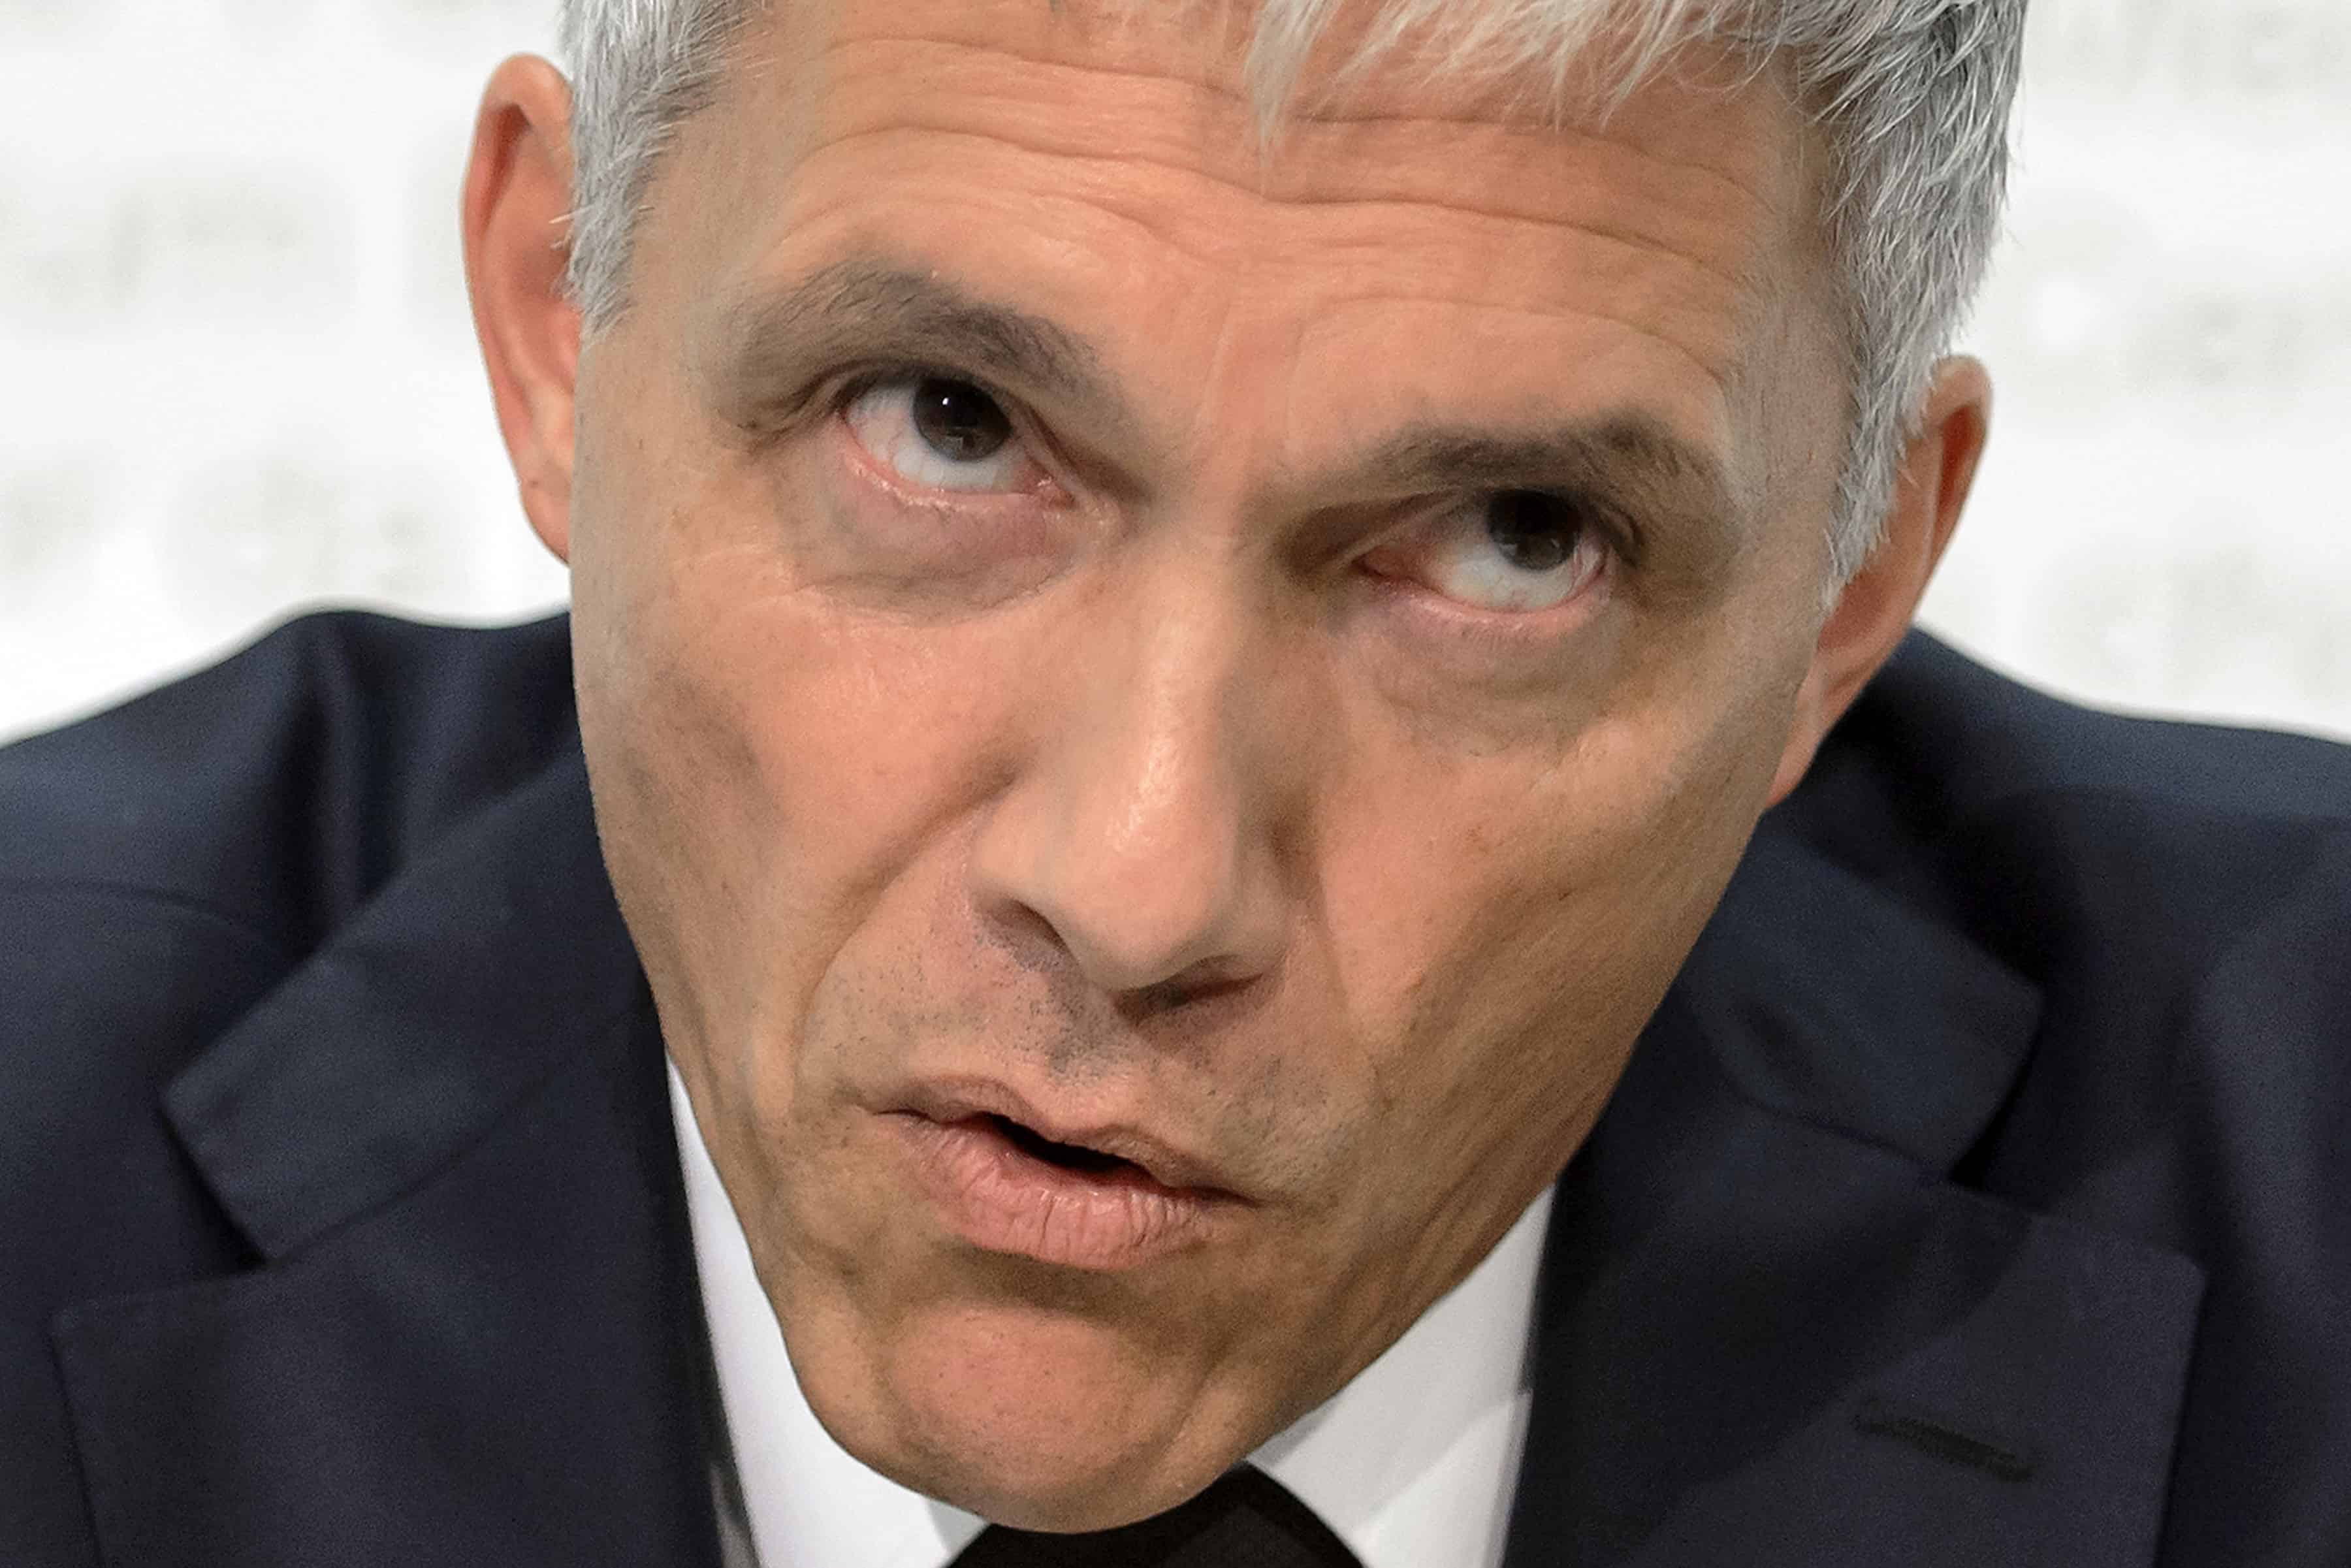 Swiss Attorney General Michael Lauber attends a press conference on June 17, 2015 in Bern.